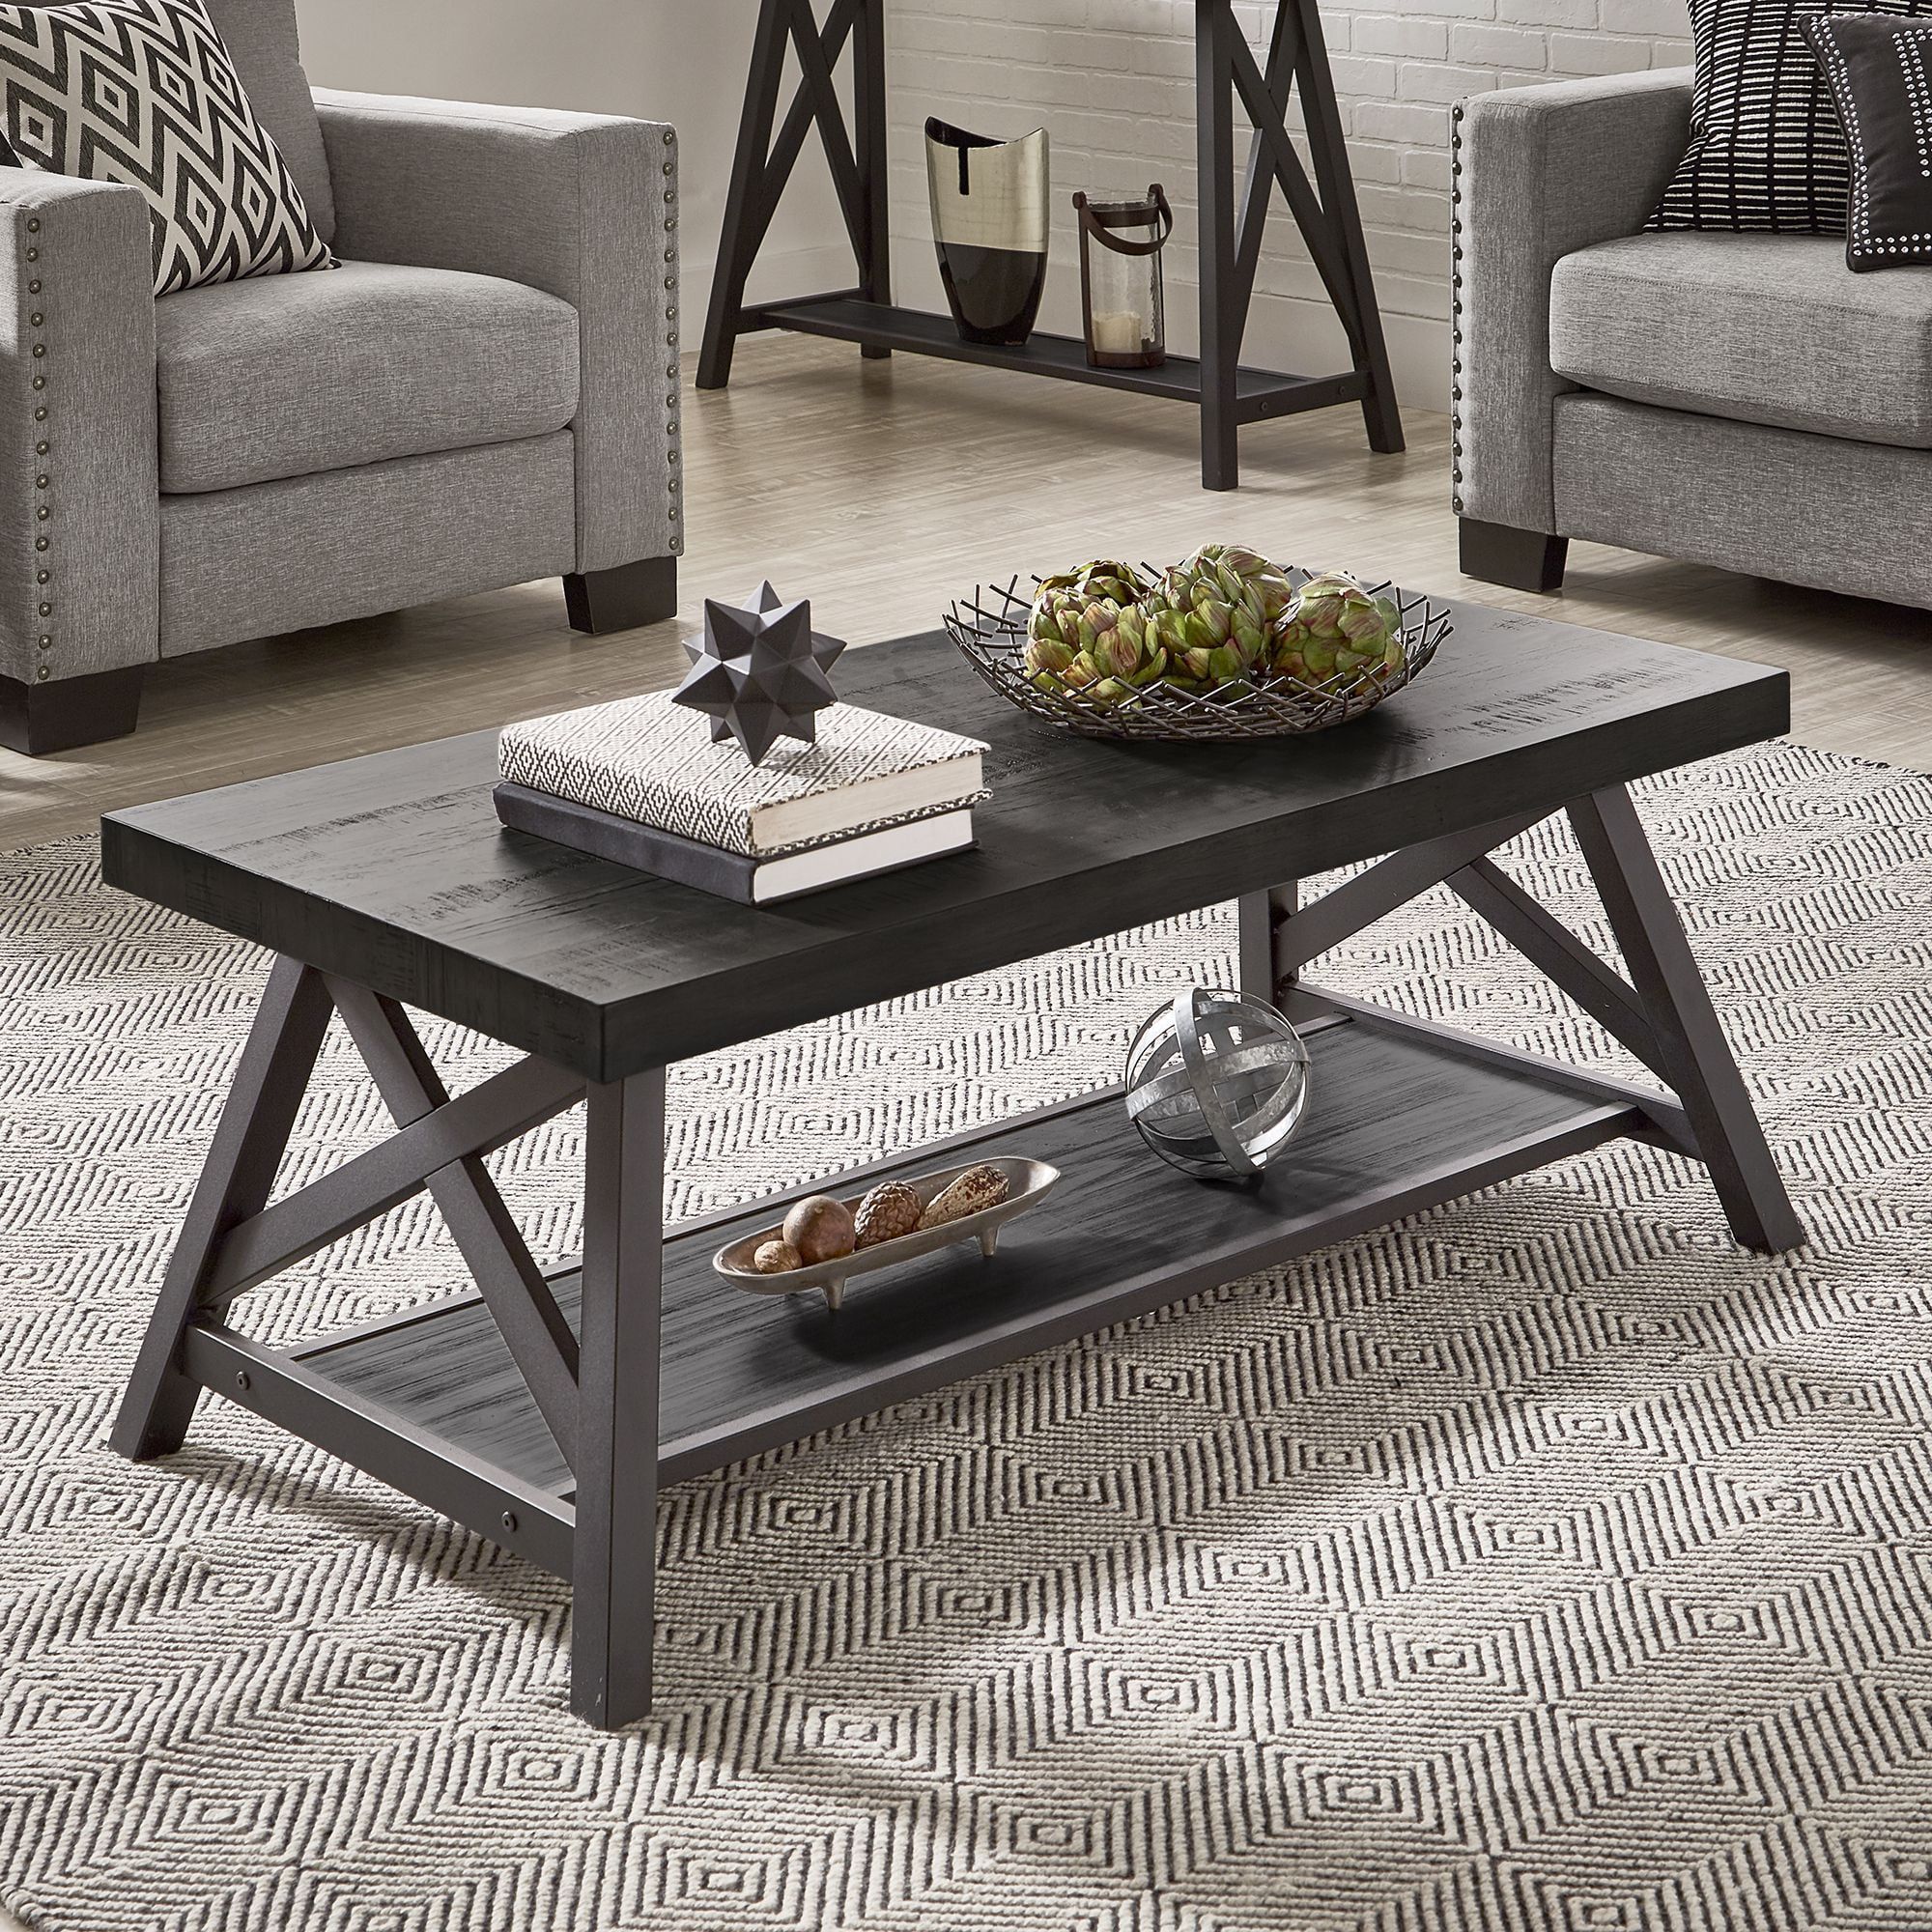 Weston Home Westyn Rustic X Base Wood Rectangular Coffee Table, Black –  Walmart In Rectangular Coffee Tables With Pedestal Bases (View 9 of 15)